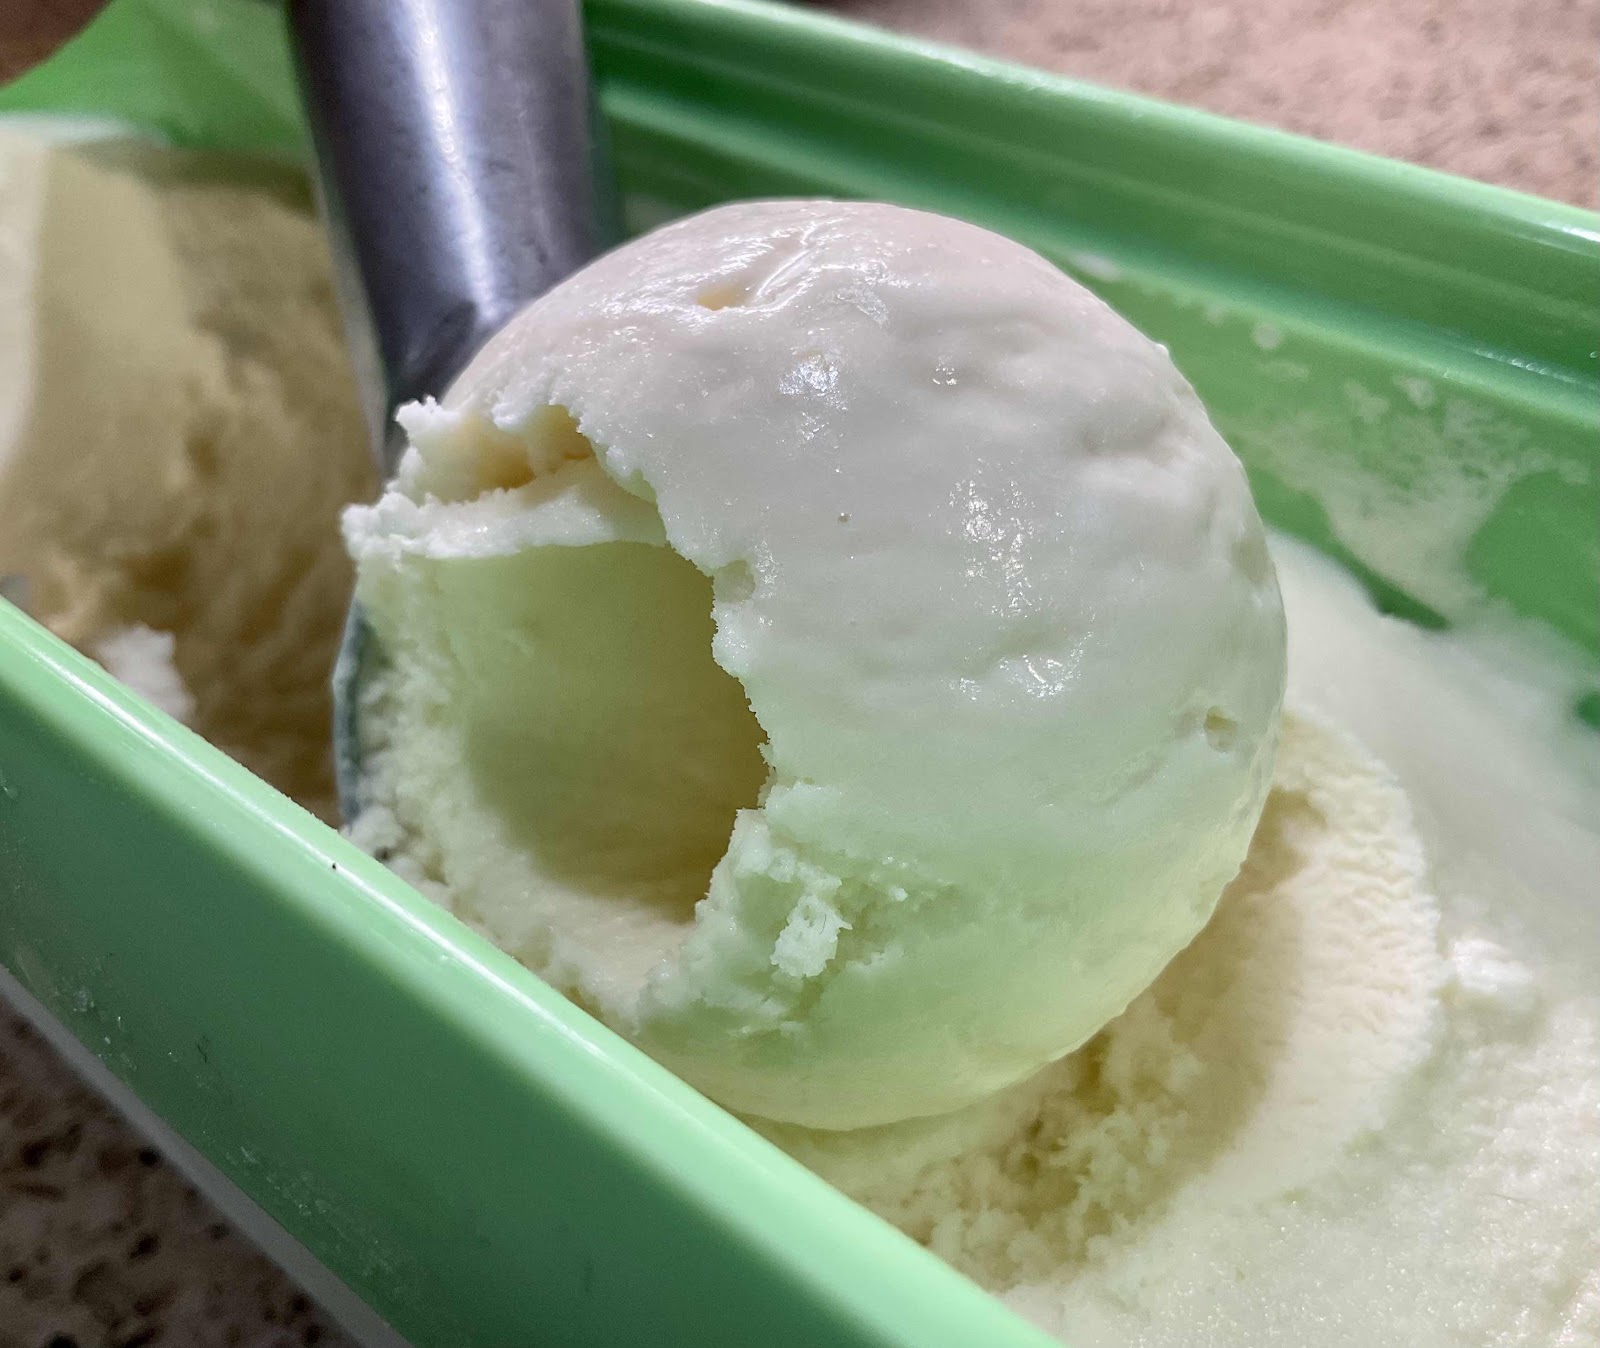 Scoopable right from the freezer!